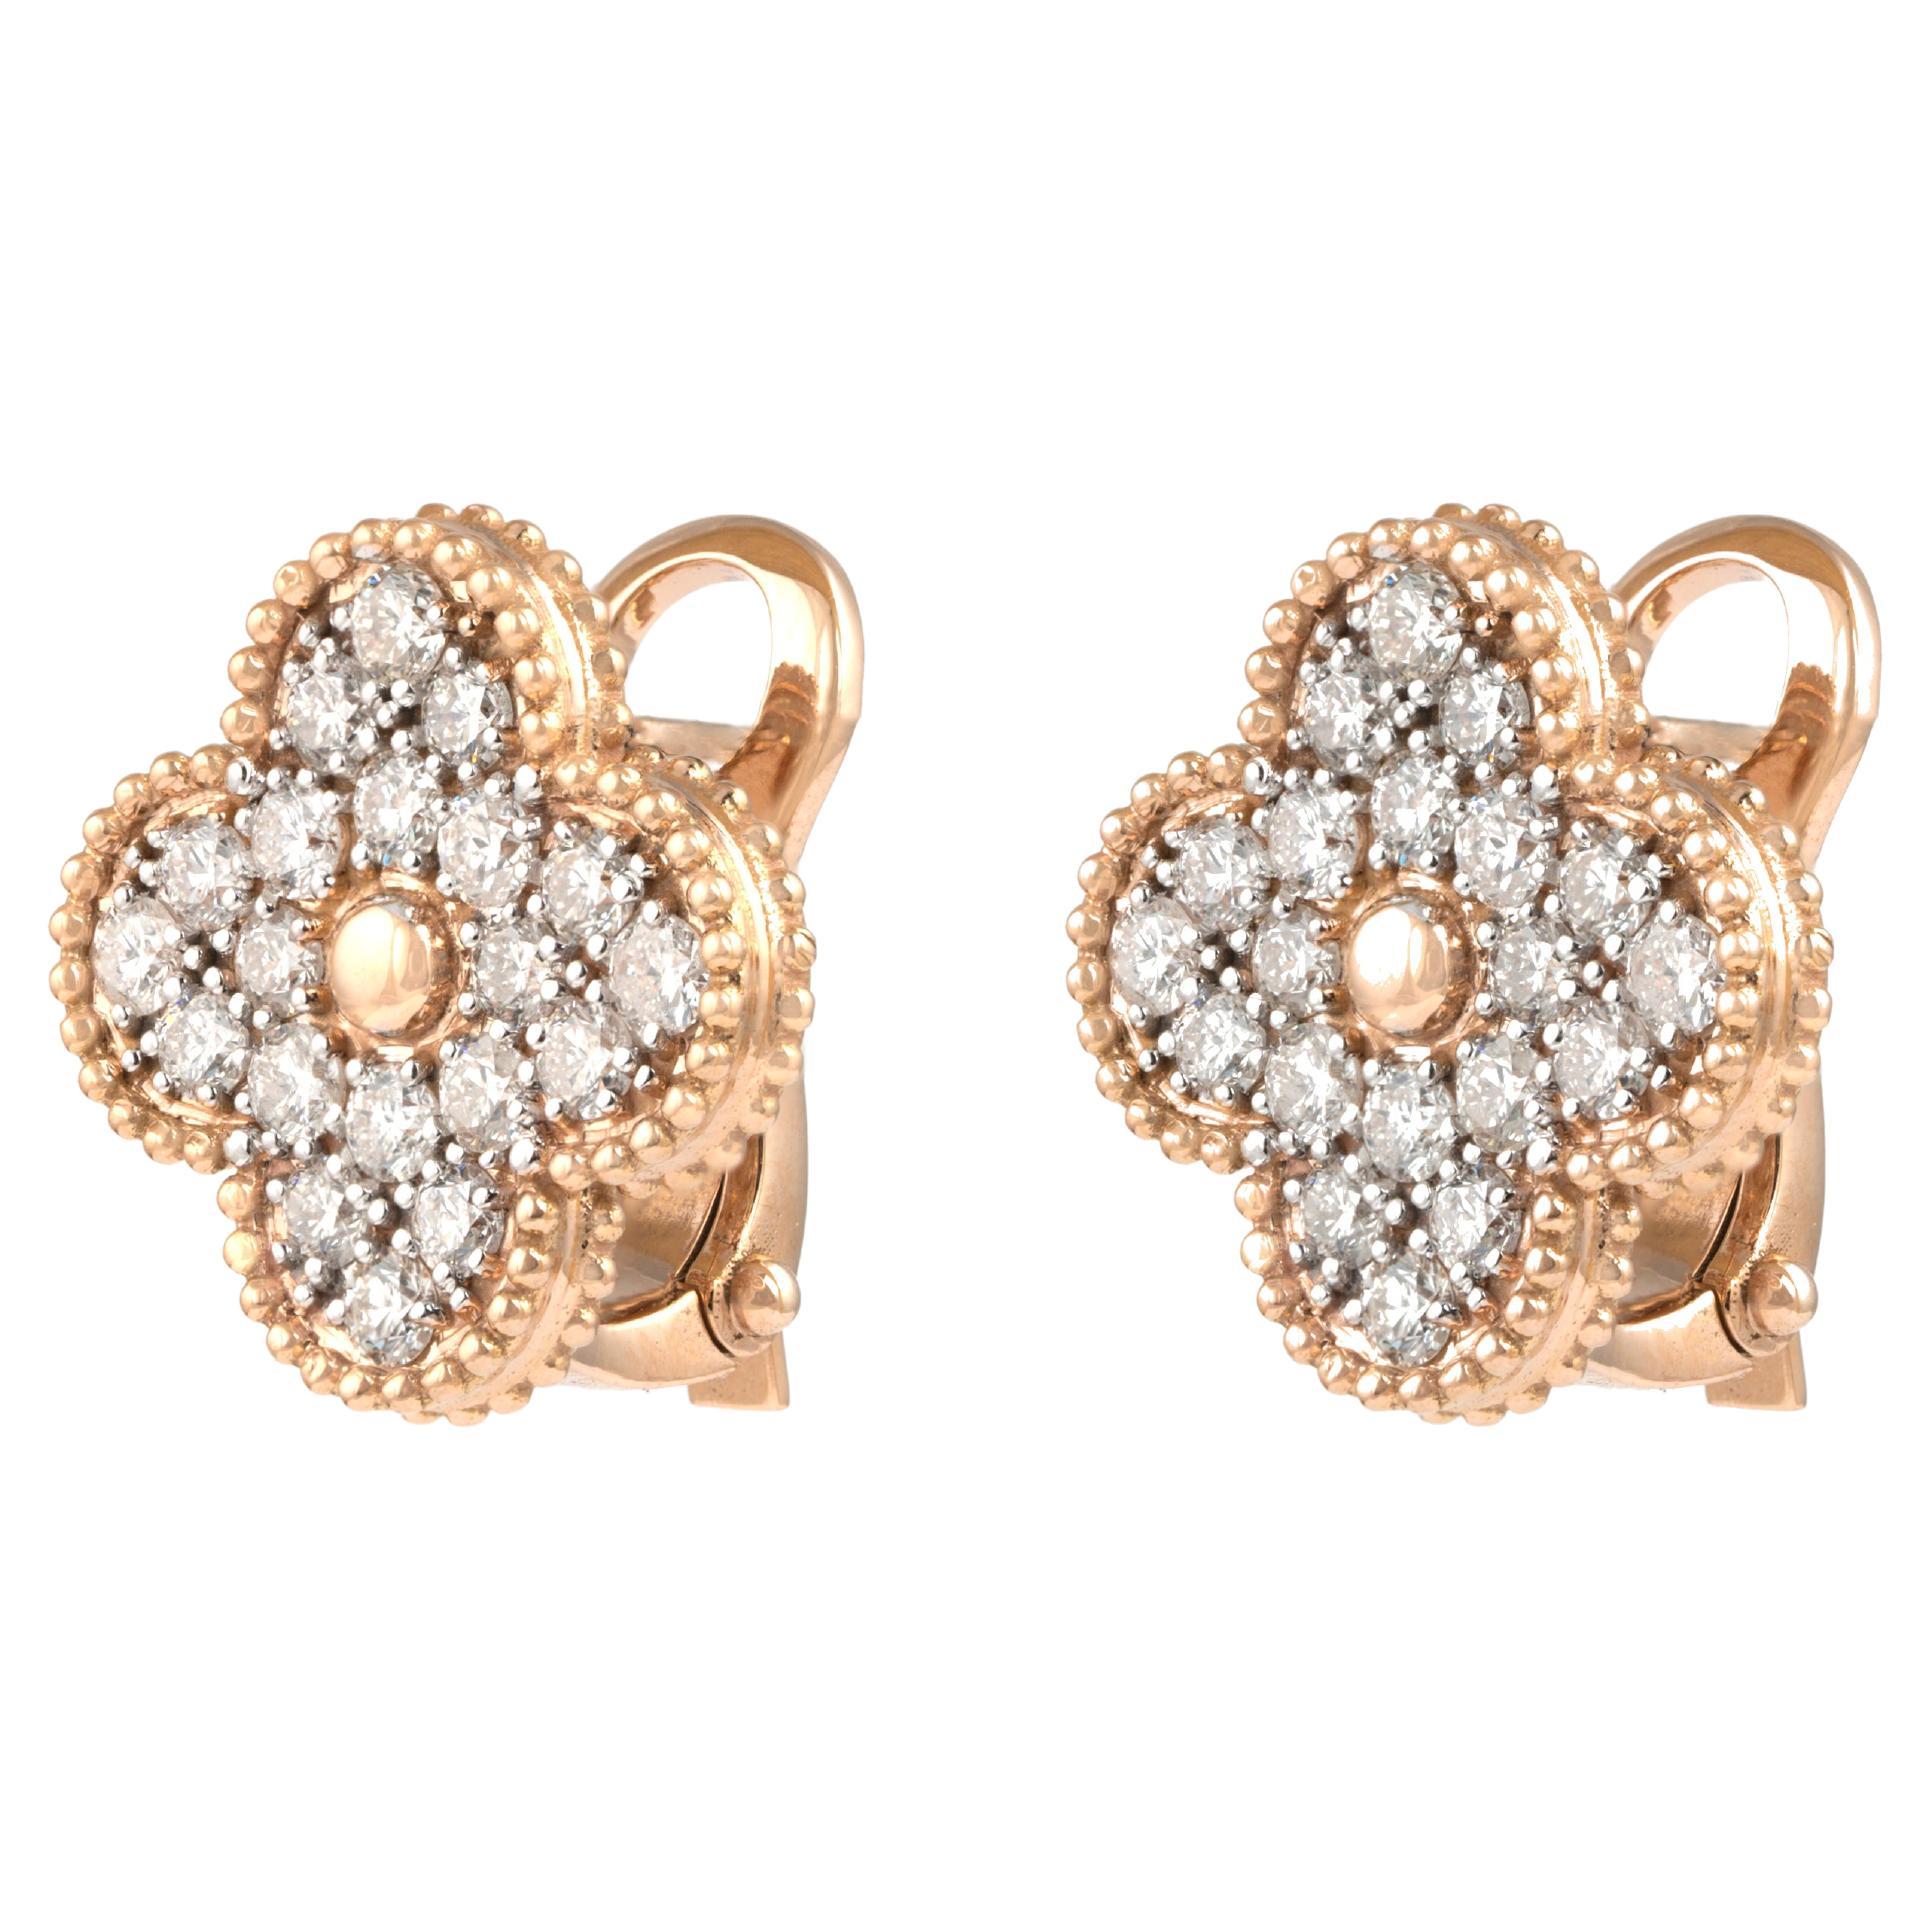 Natural Diamond Stud Earrings with 2.52 Carats Diamond and 18k For Sale